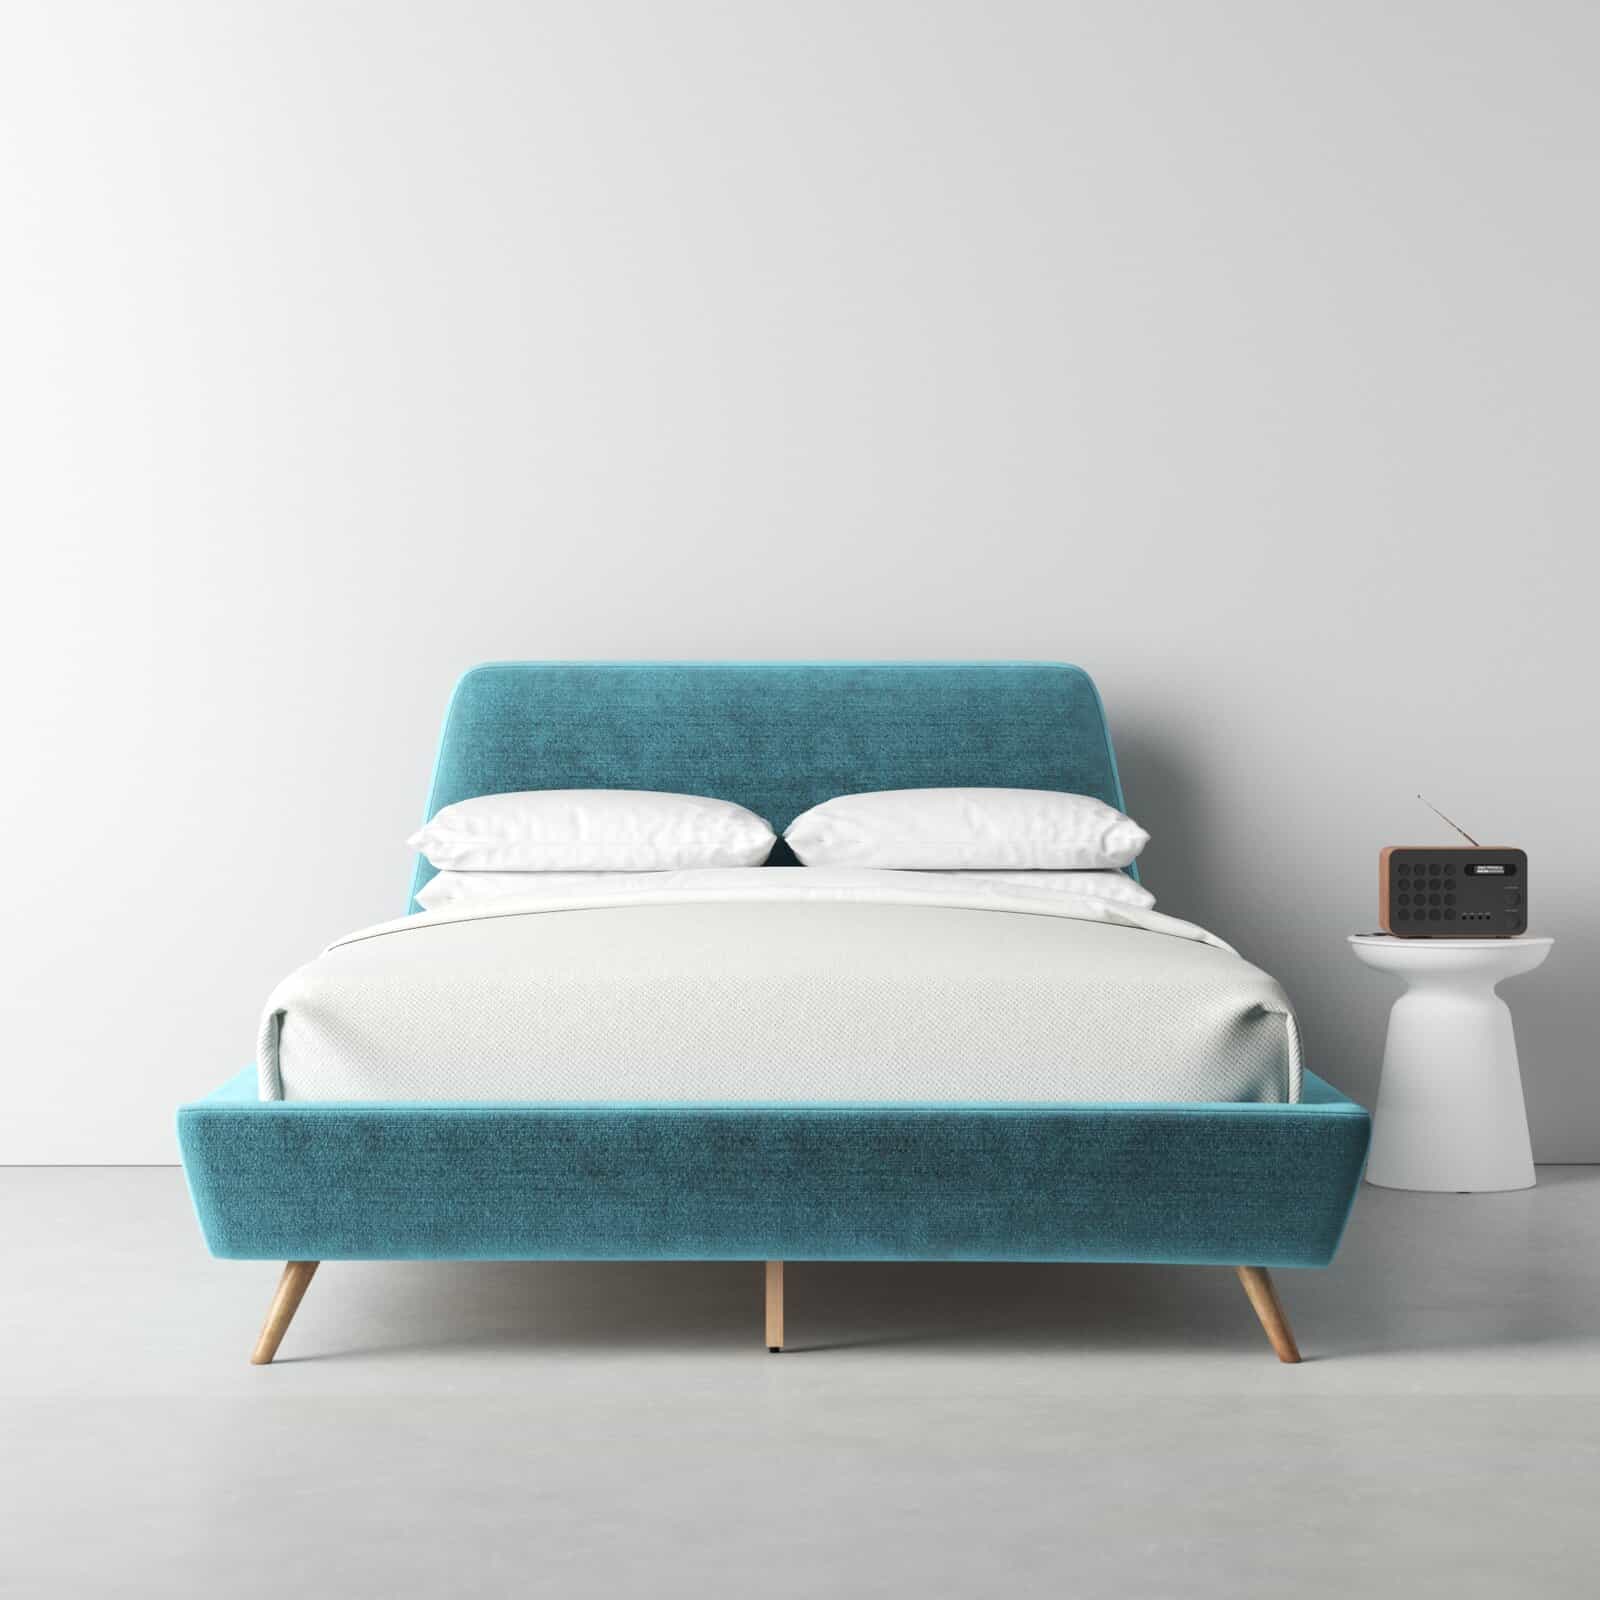 Fizz Solid Wood and Upholstered Bed